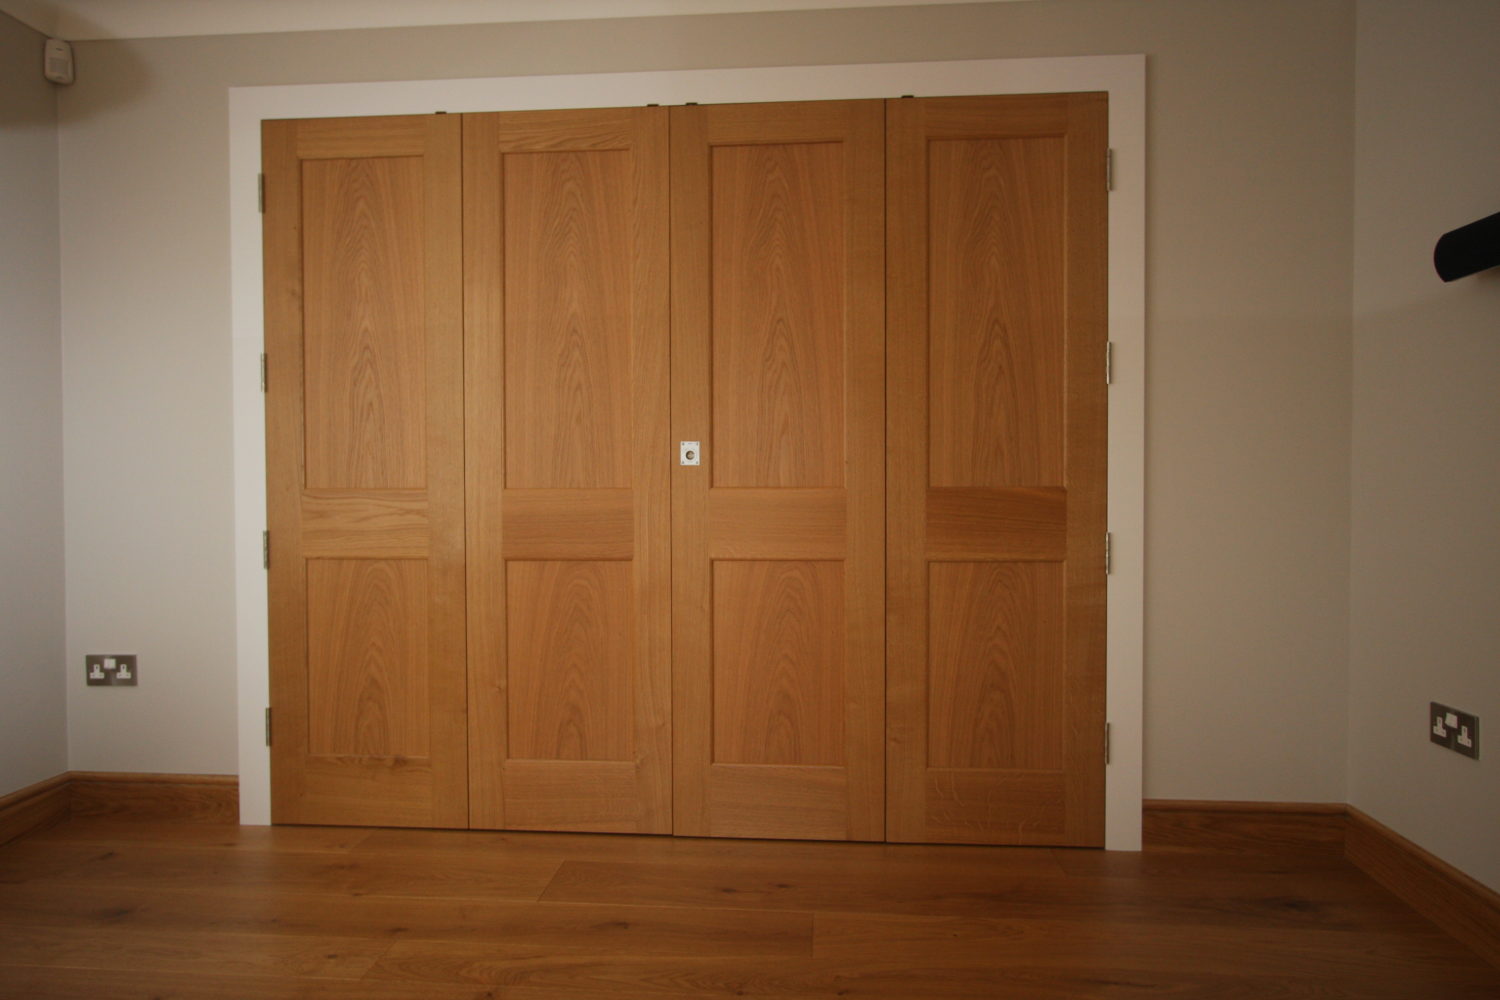 Set of Room Dividers Made with 2 Pairs of Doors